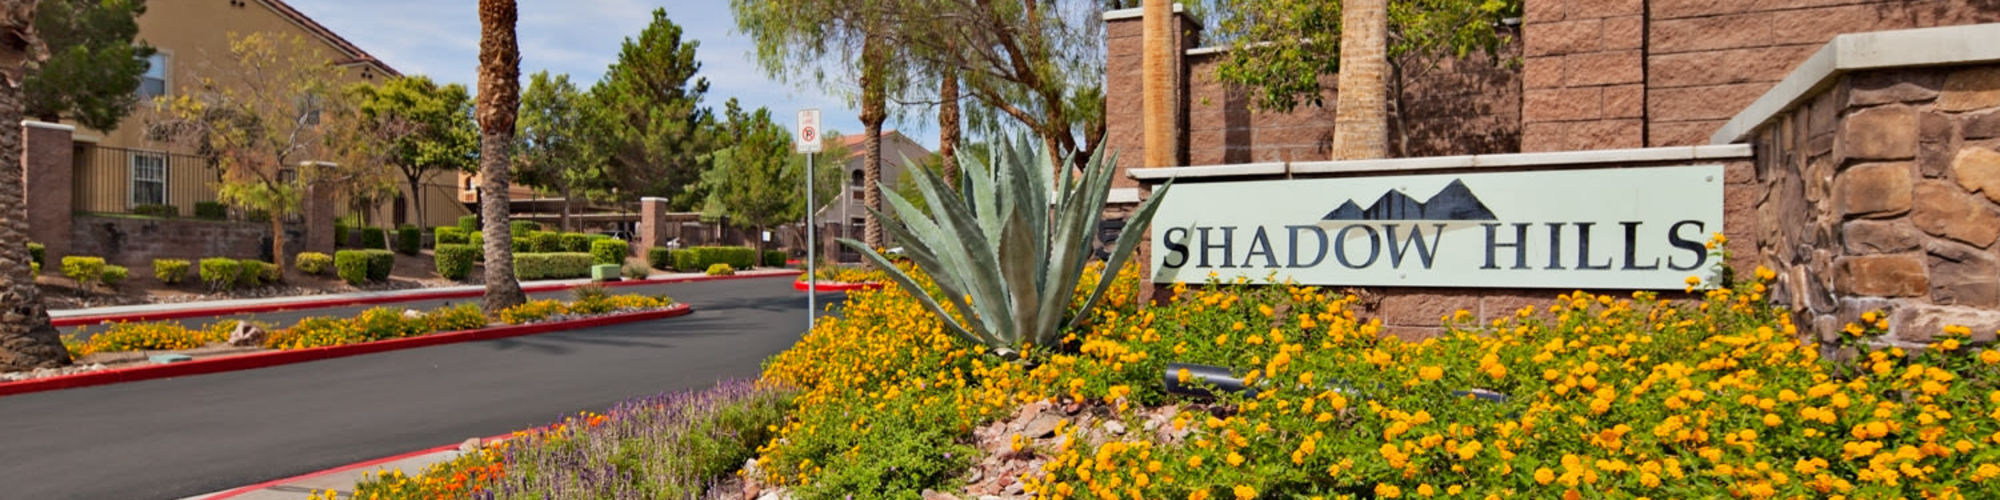 Schedule a tour of Shadow Hills at Lone Mountain in Las Vegas, Nevada